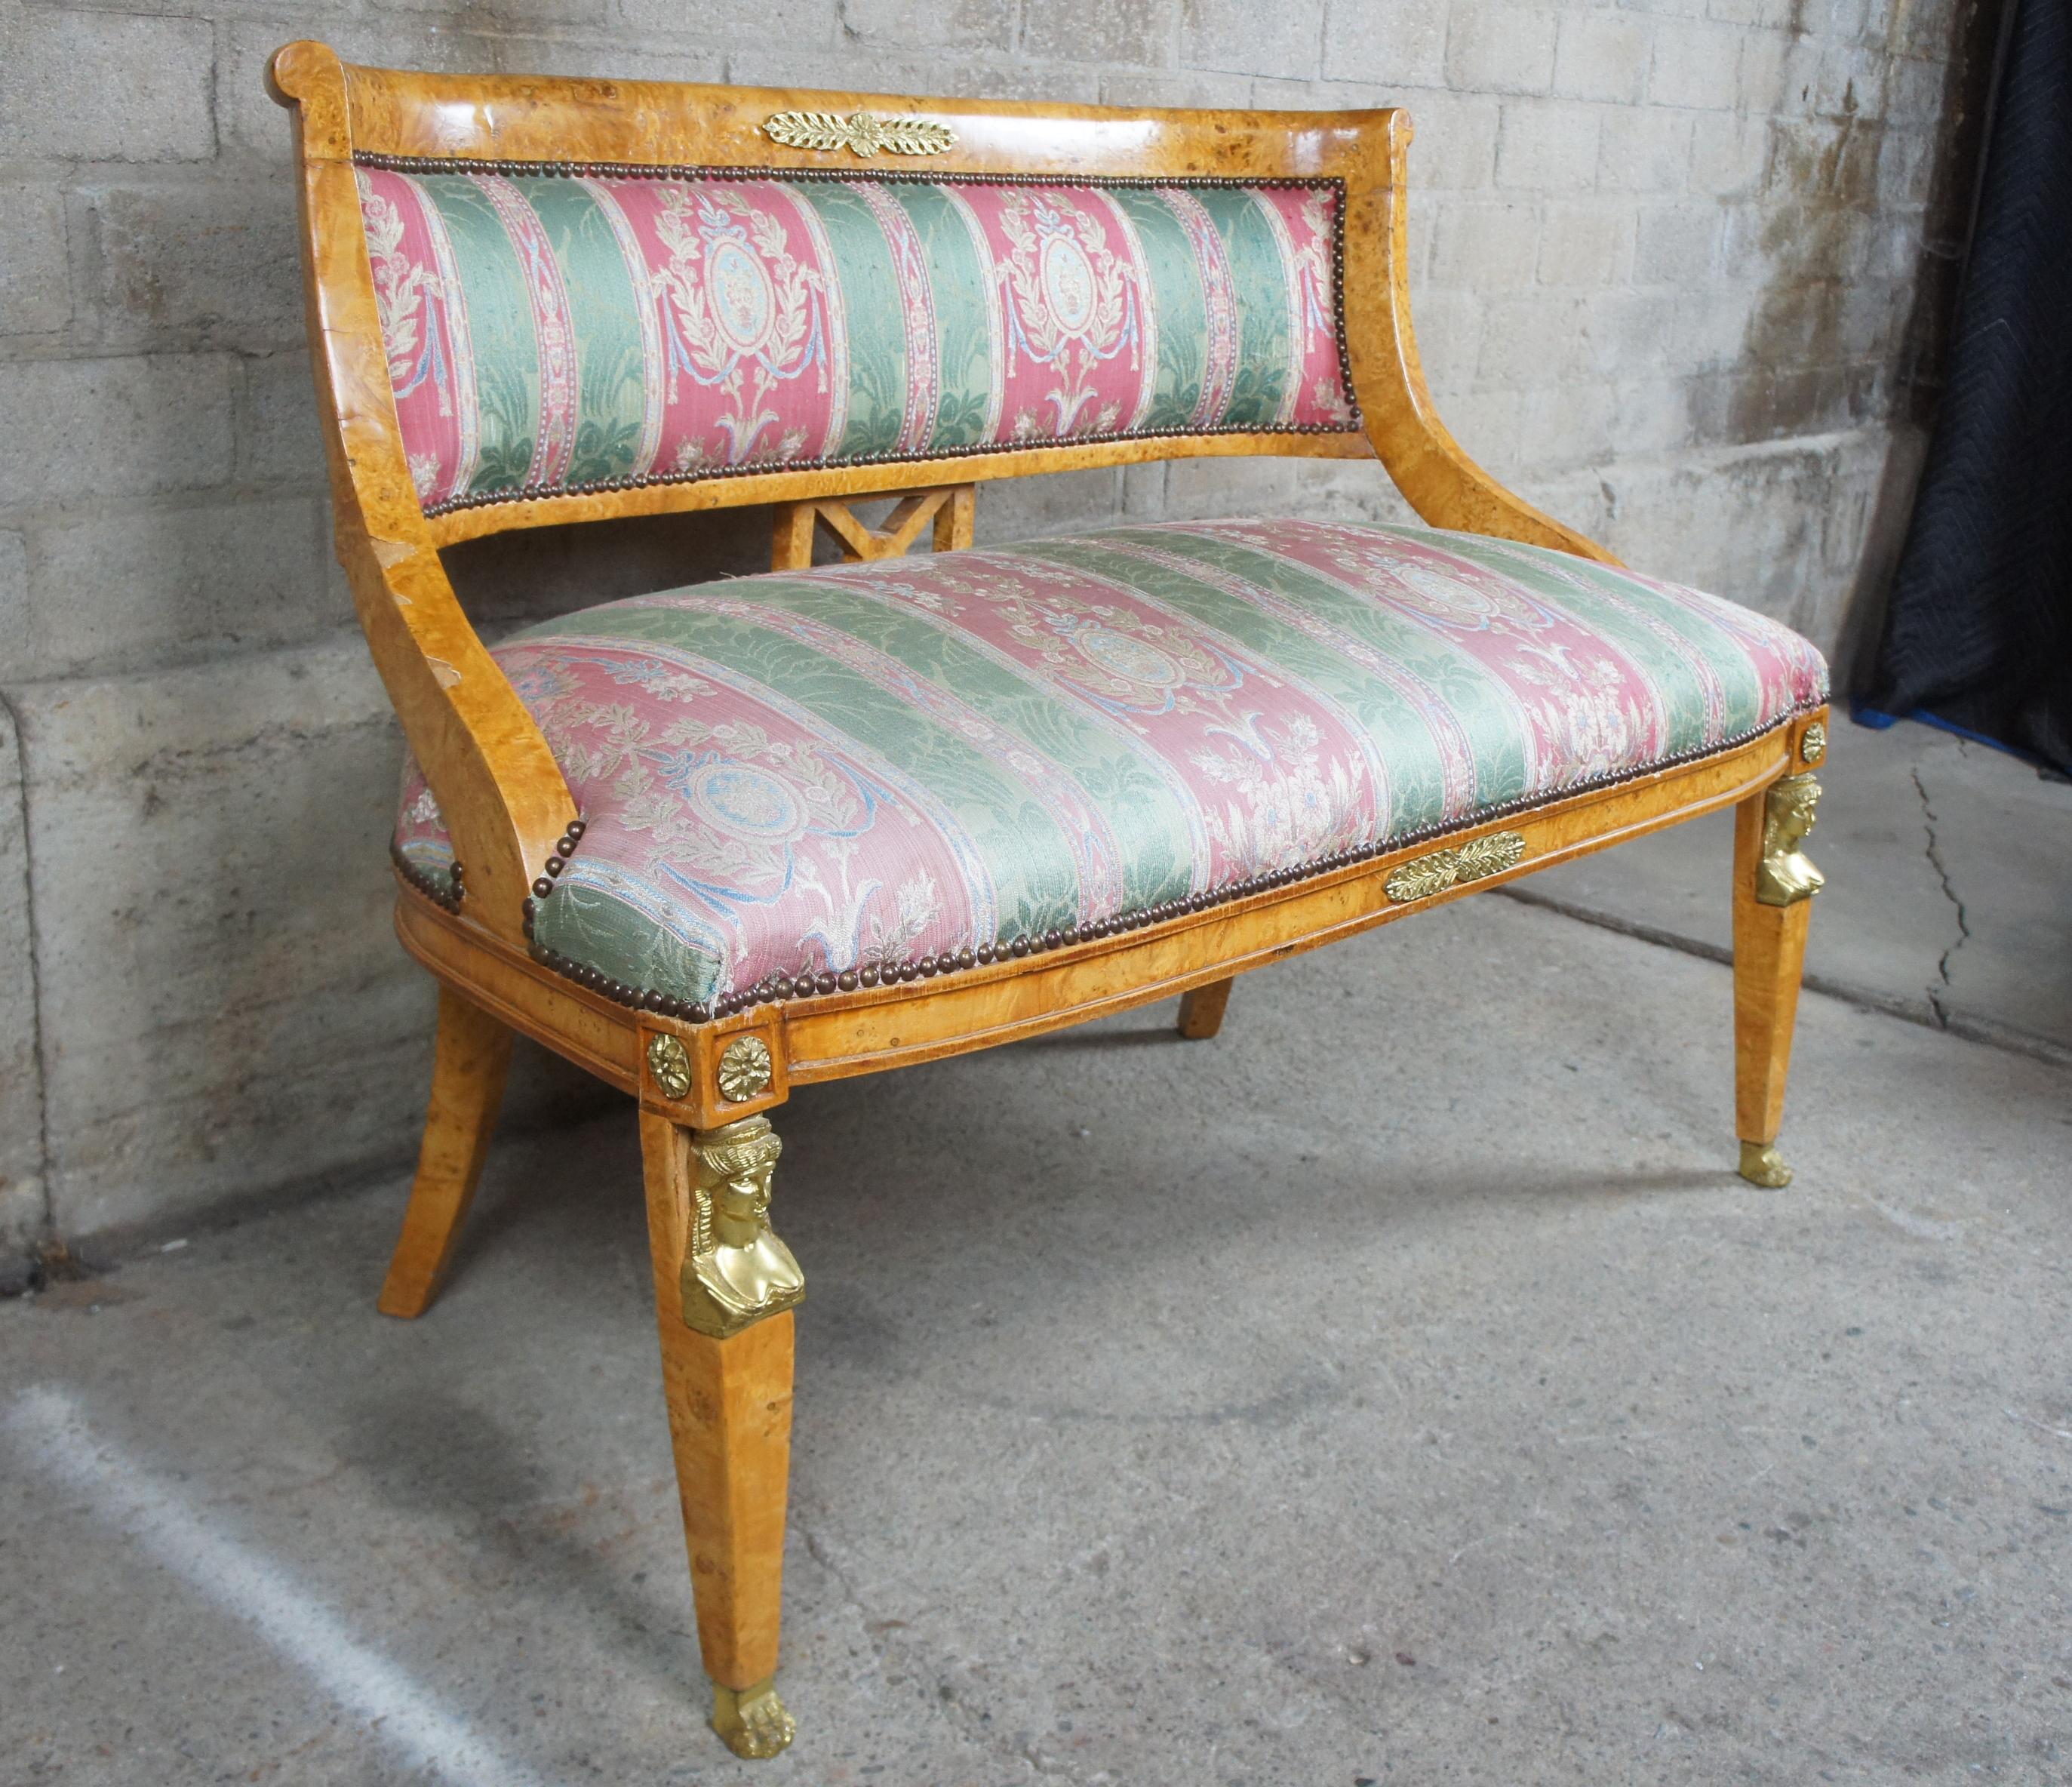 Monumental early 20th century parlor settee. A neoclassical and Egyptian revival inspired design. Features a curved rail with unique X-back between contoured arms leading to regal striped upholstery. The chairs are supported by square tapered front